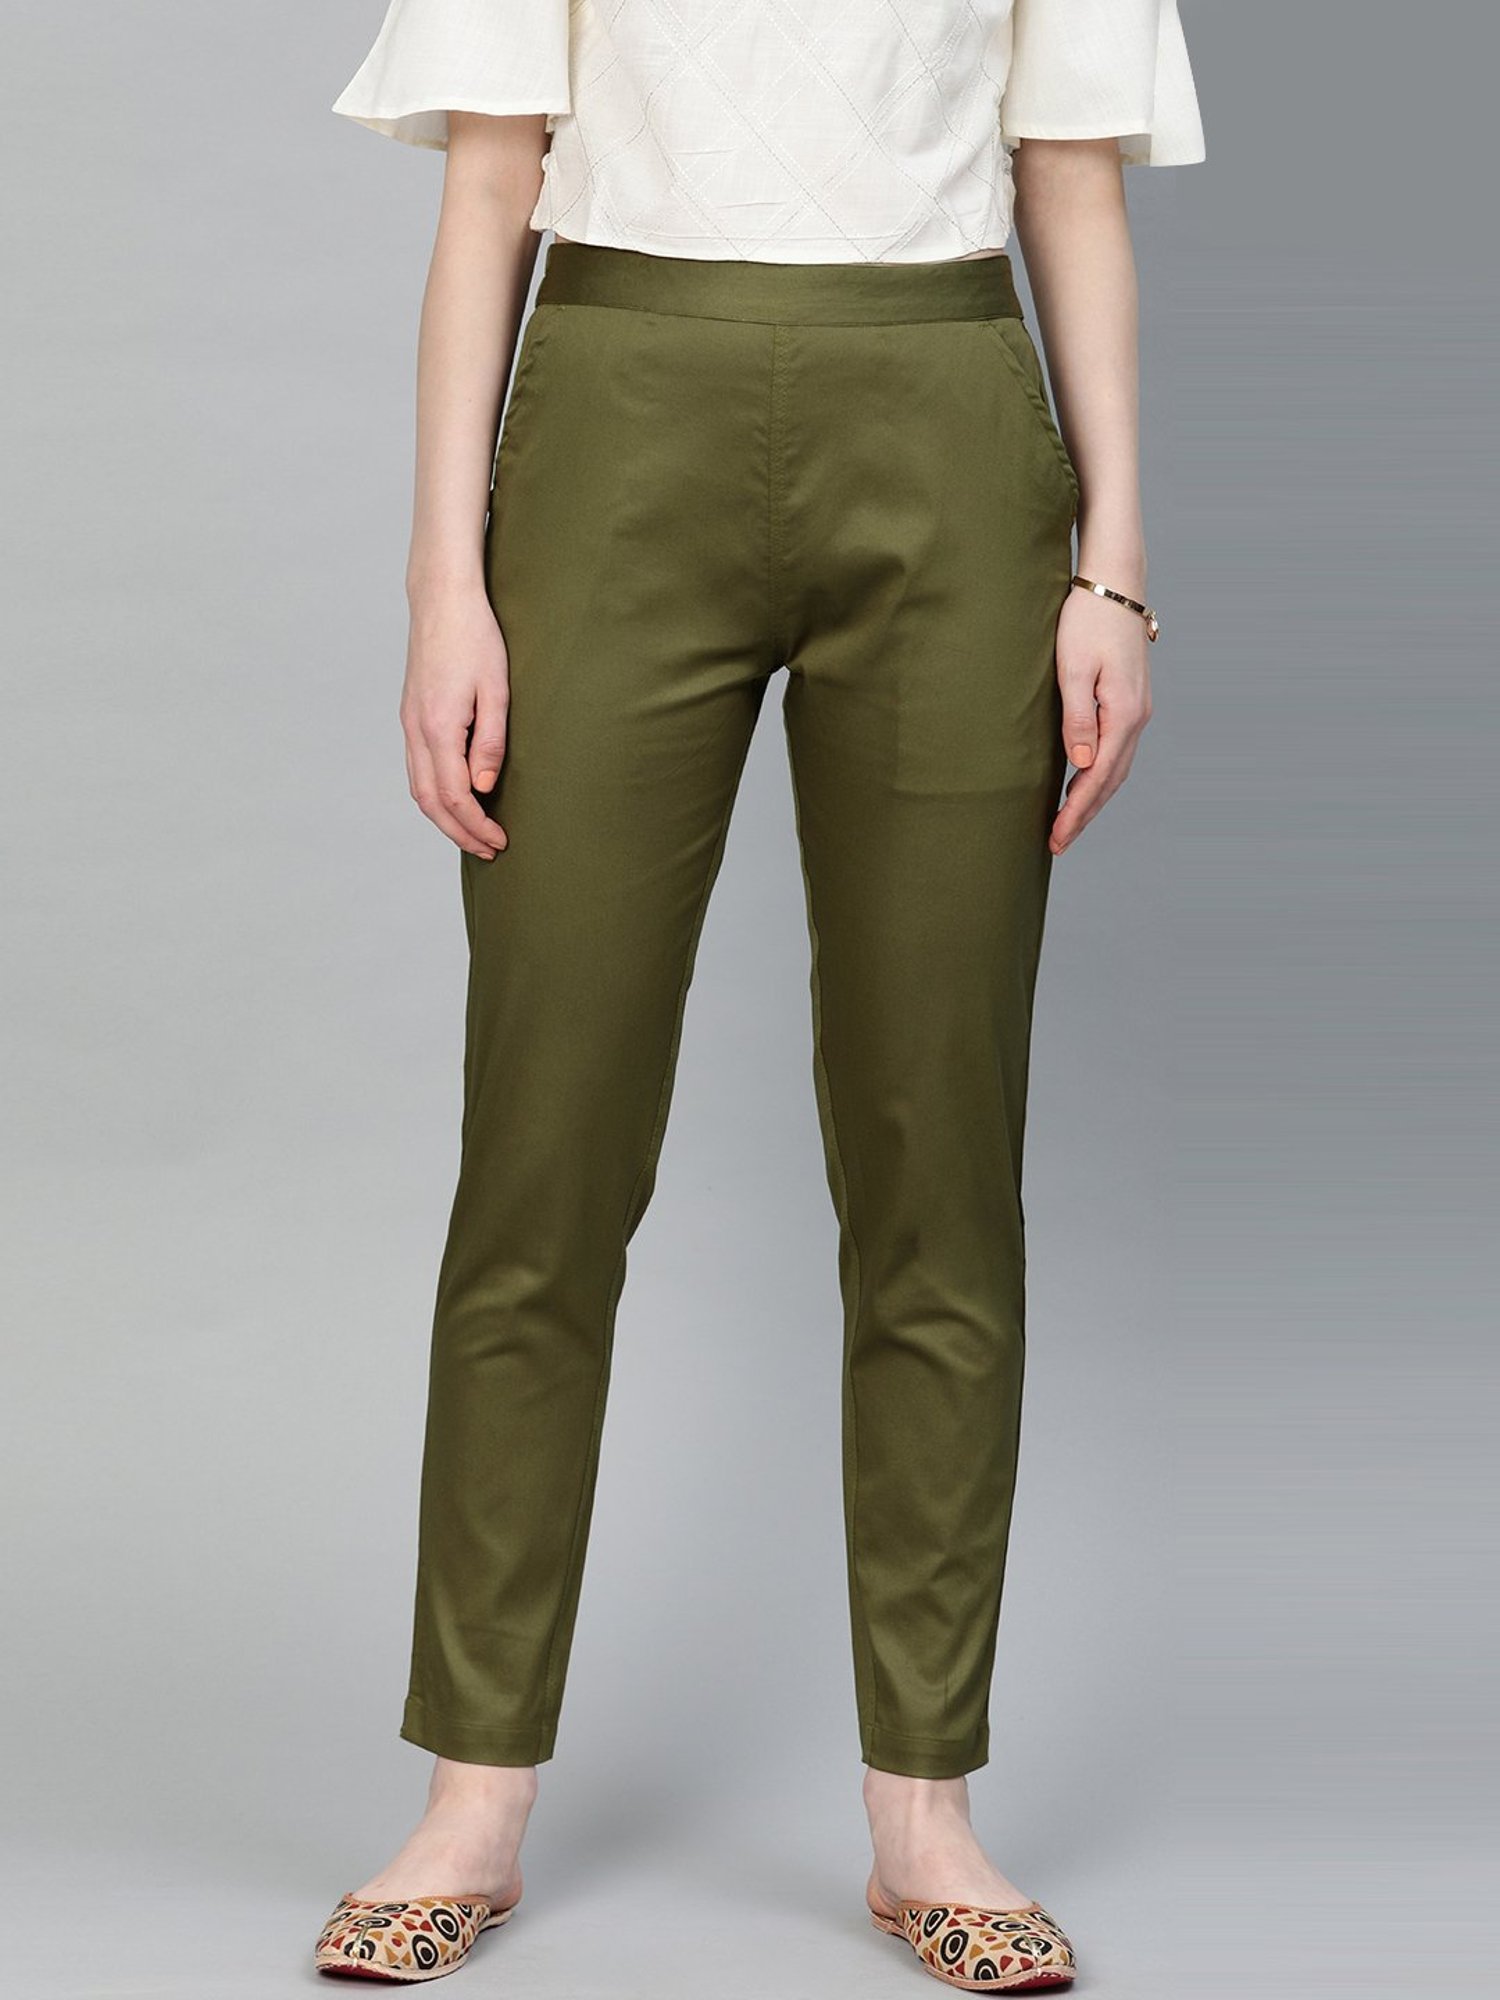 Buy Olive Green Trousers  Pants for Women by Outryt Online  Ajiocom